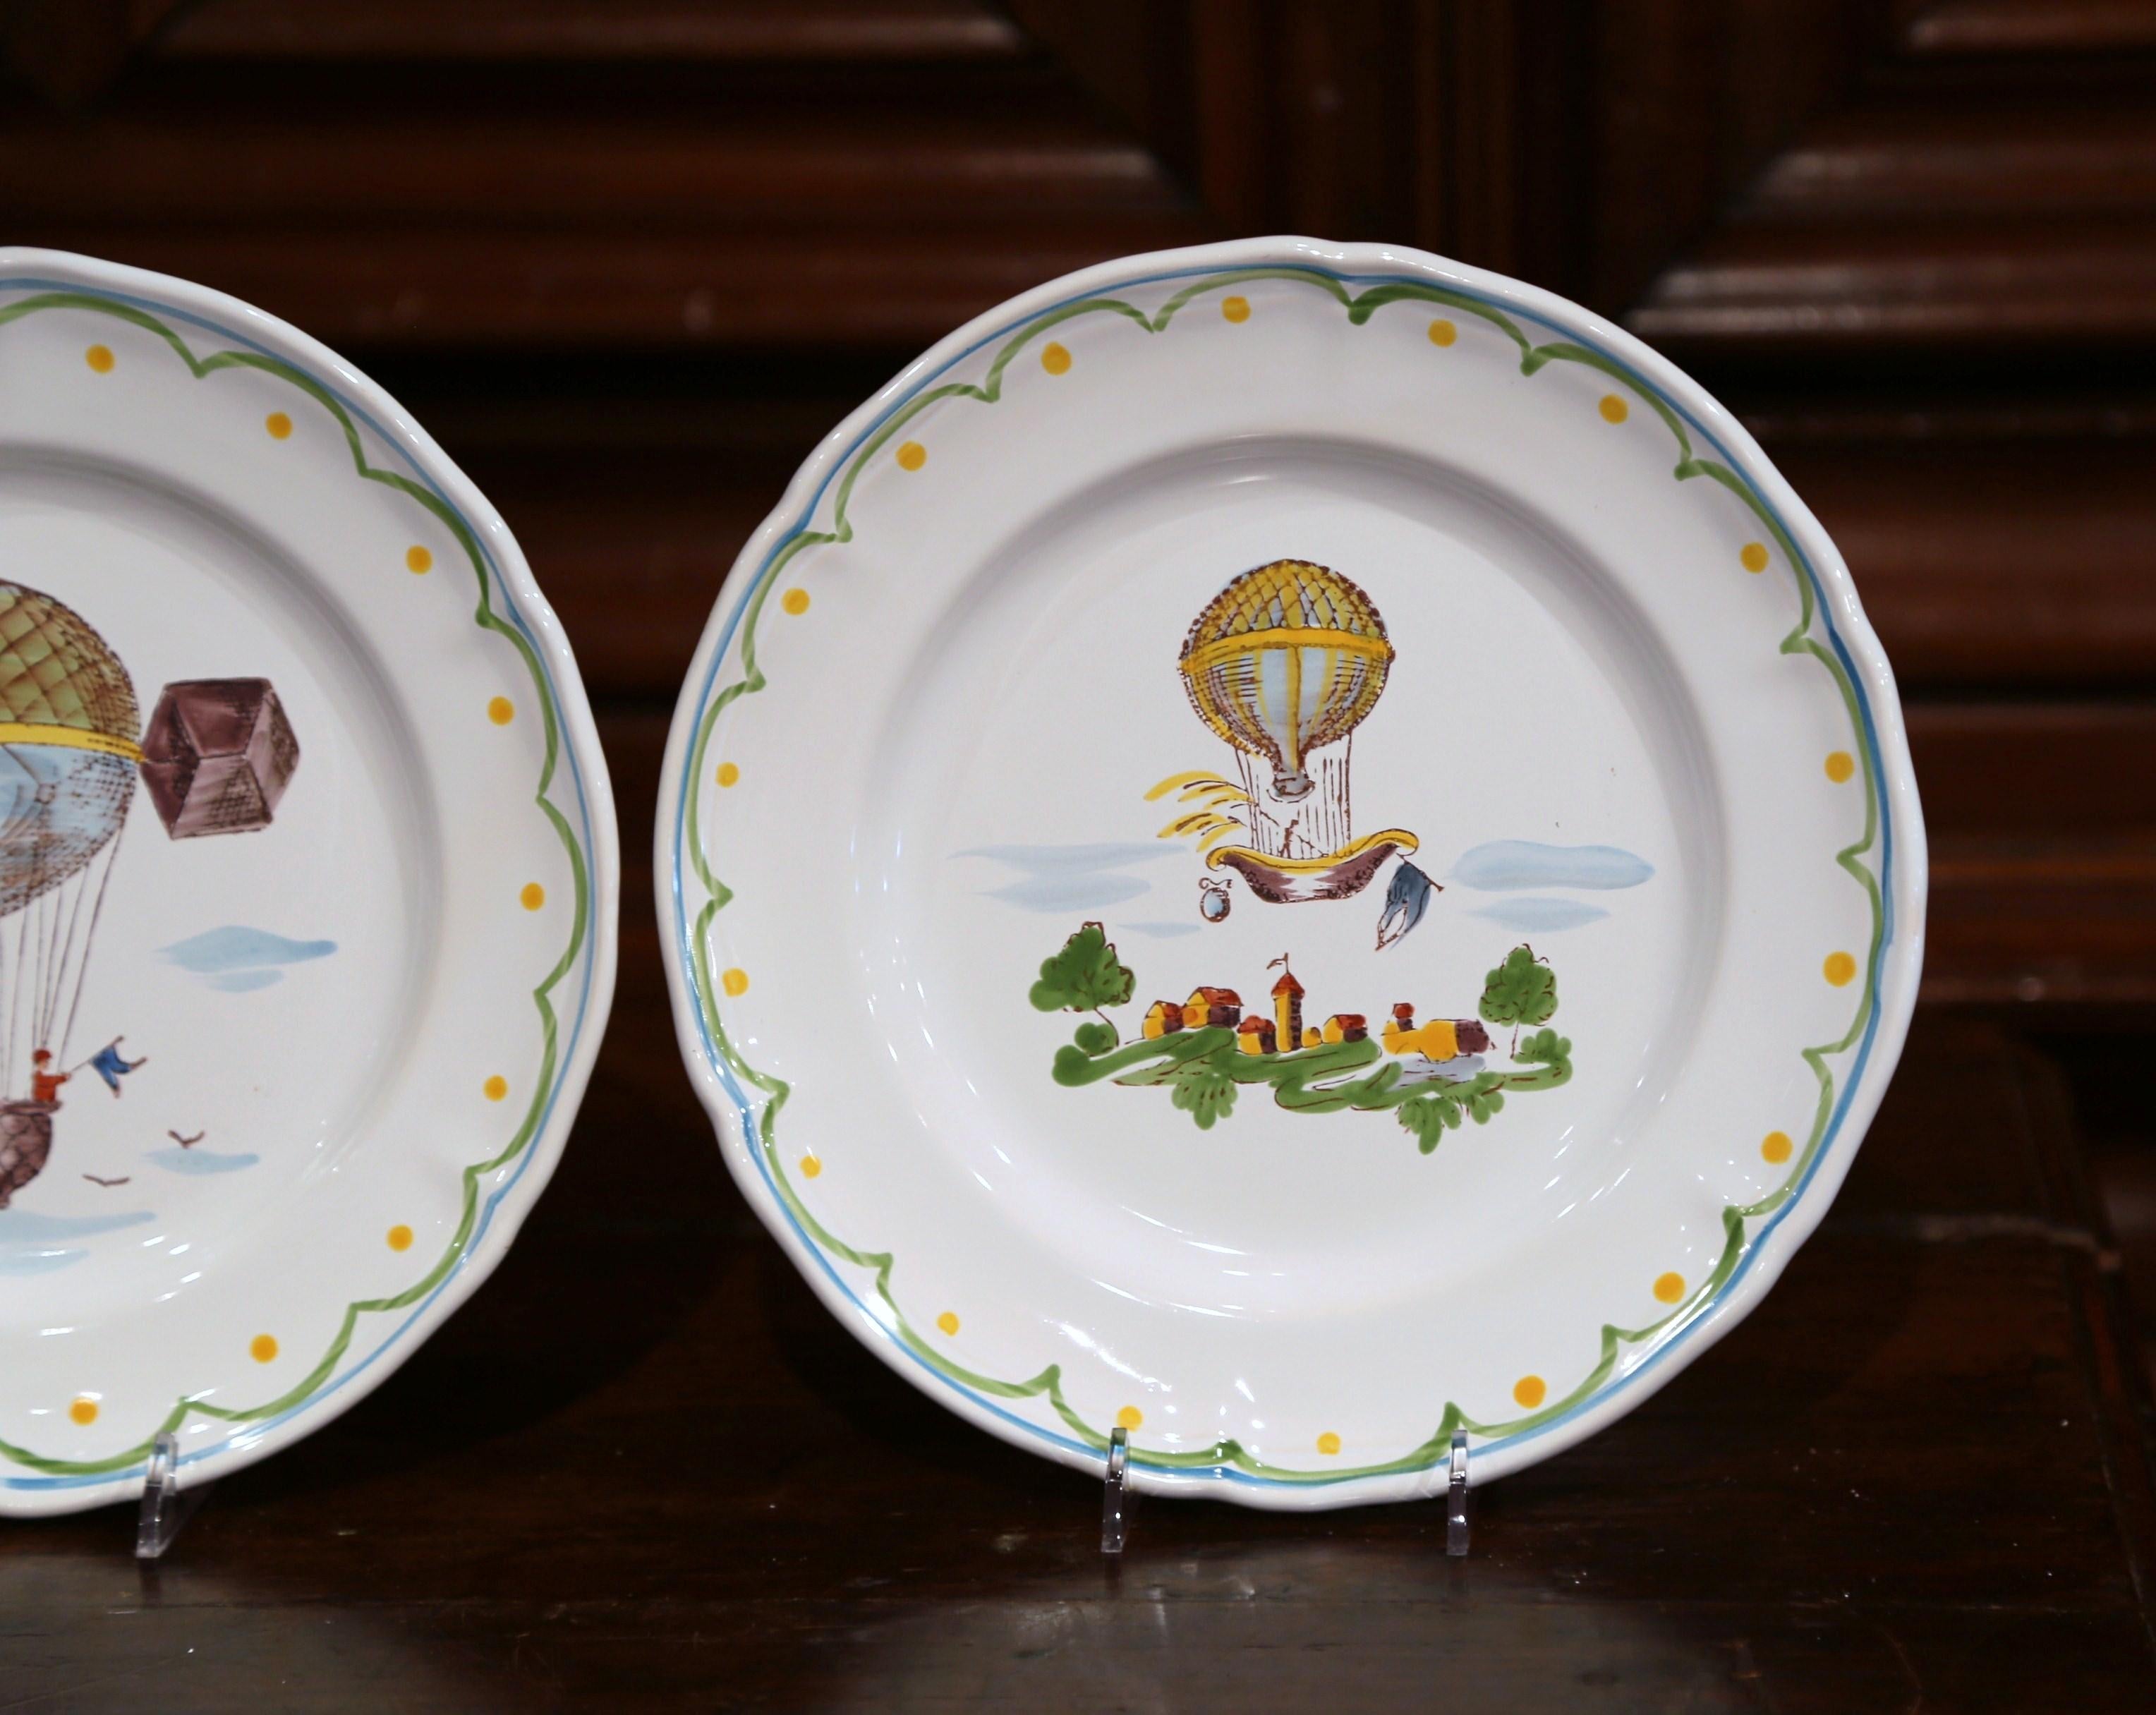 Set of Six French Hand-Painted Ceramic Hot Air Balloon Plates from Brittany 5